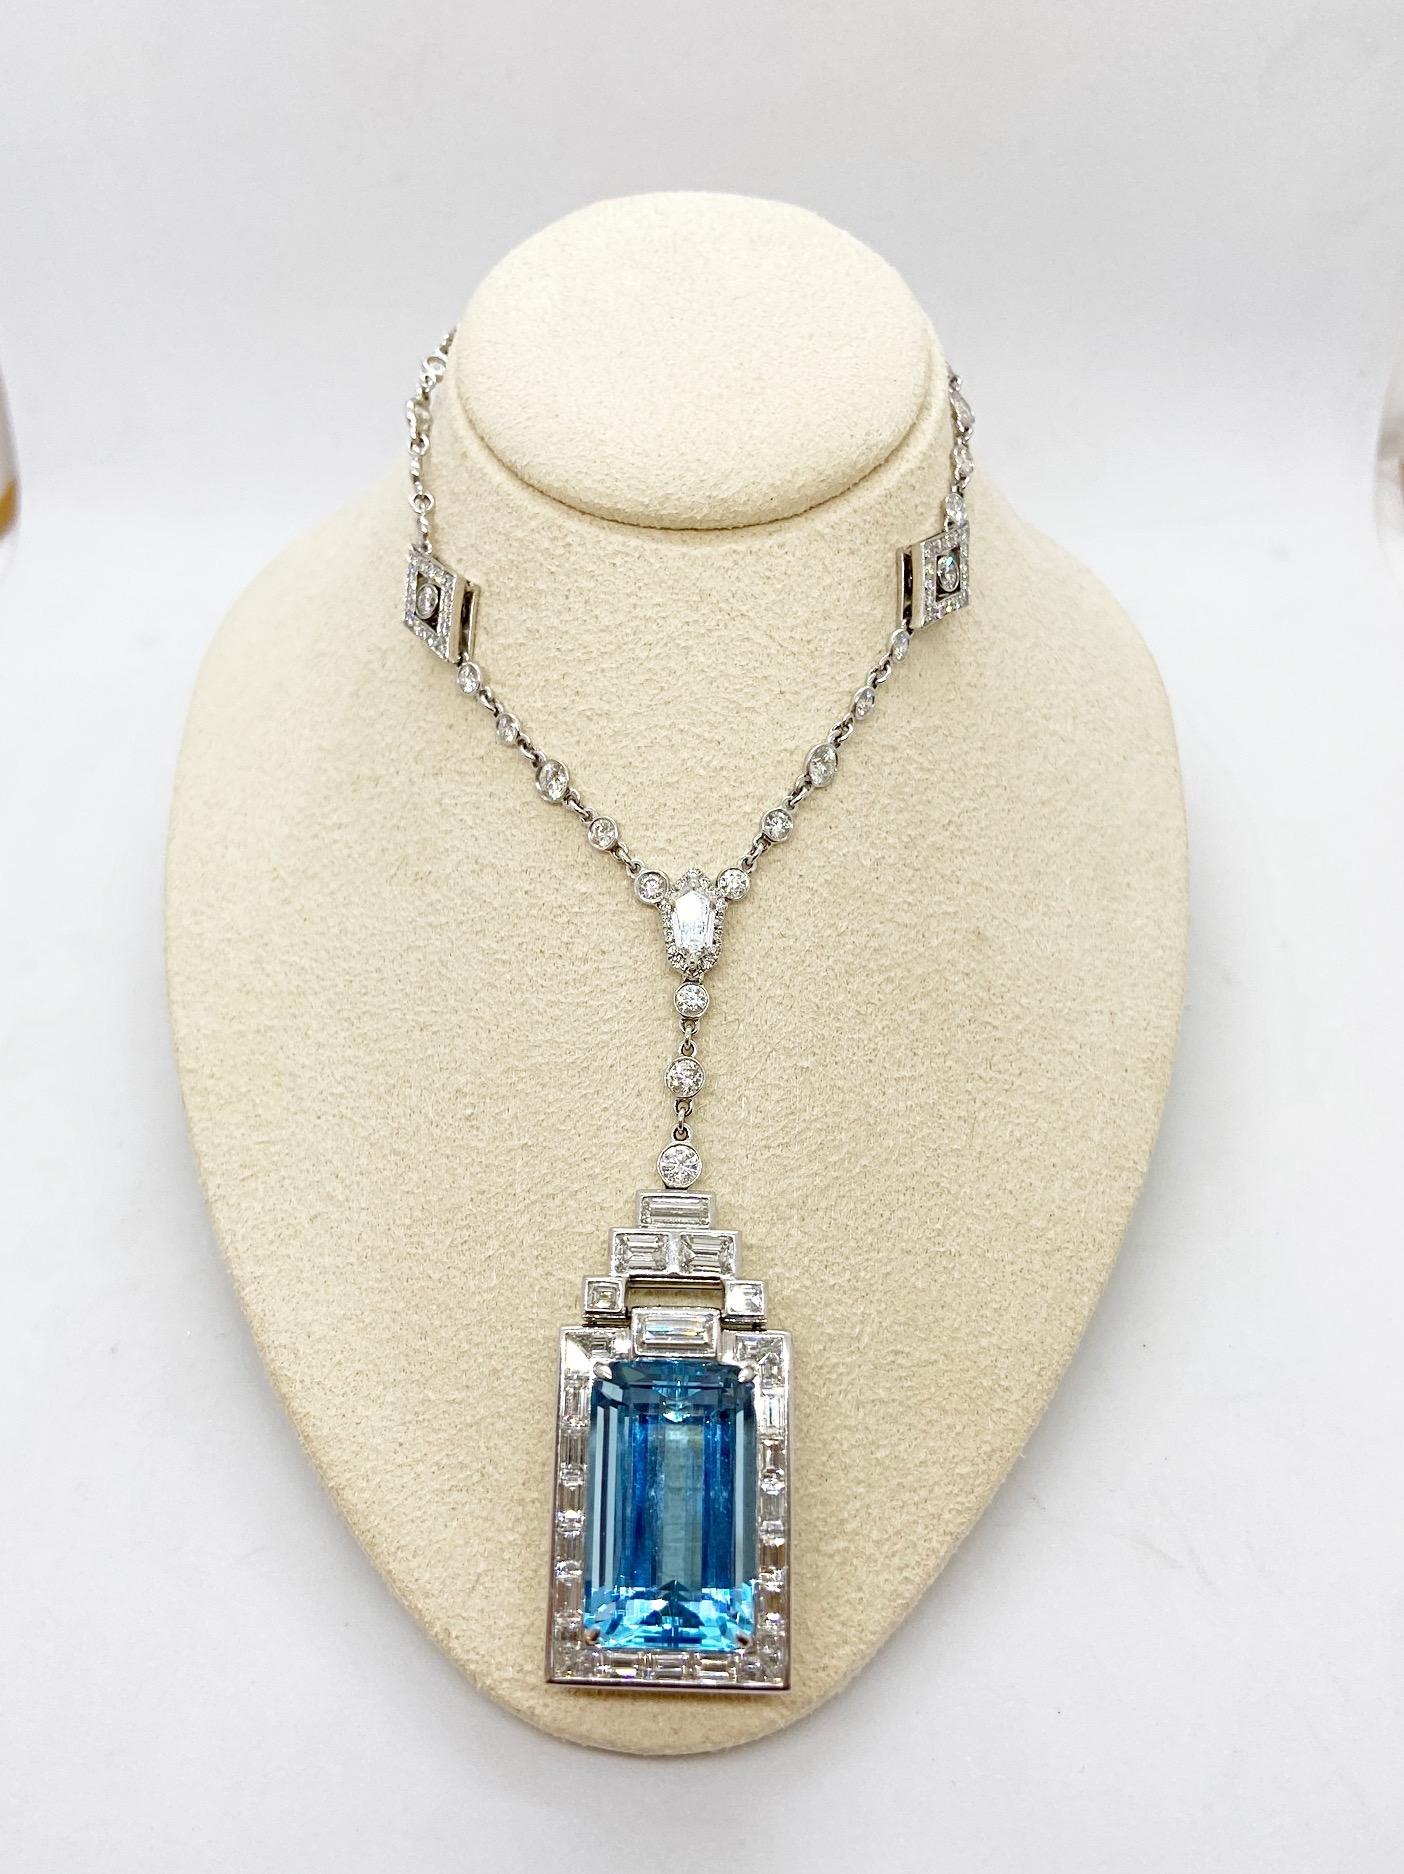 Known best for old world craftsmanship, Hammerman Brothers is a 75 year old company which remains American made.
This magnificent Art Deco-inspired pendant is the perfect example of their extraordinary workmanship. The platinum deco pendant necklace